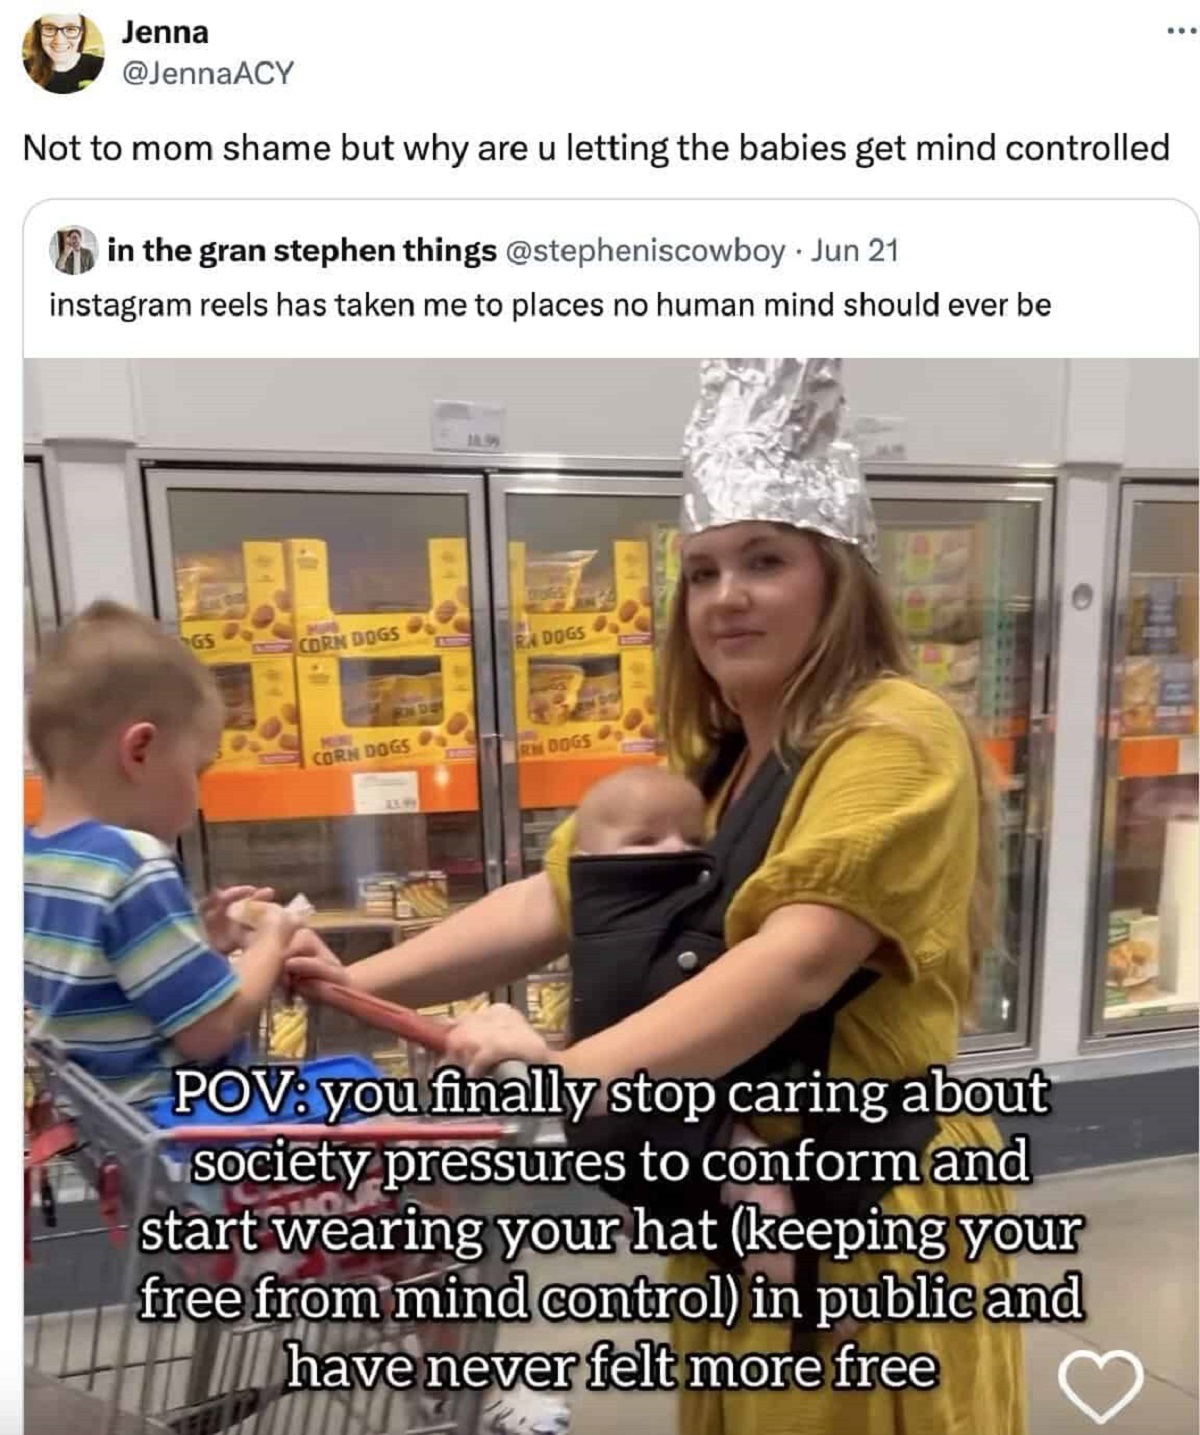 Internet meme - Jenna Not to mom shame but why are u letting the babies get mind controlled in the gran stephen things Jun 21 instagram reels has taken me to places no human mind should ever be Pov you finally stop caring about society pressures to confor